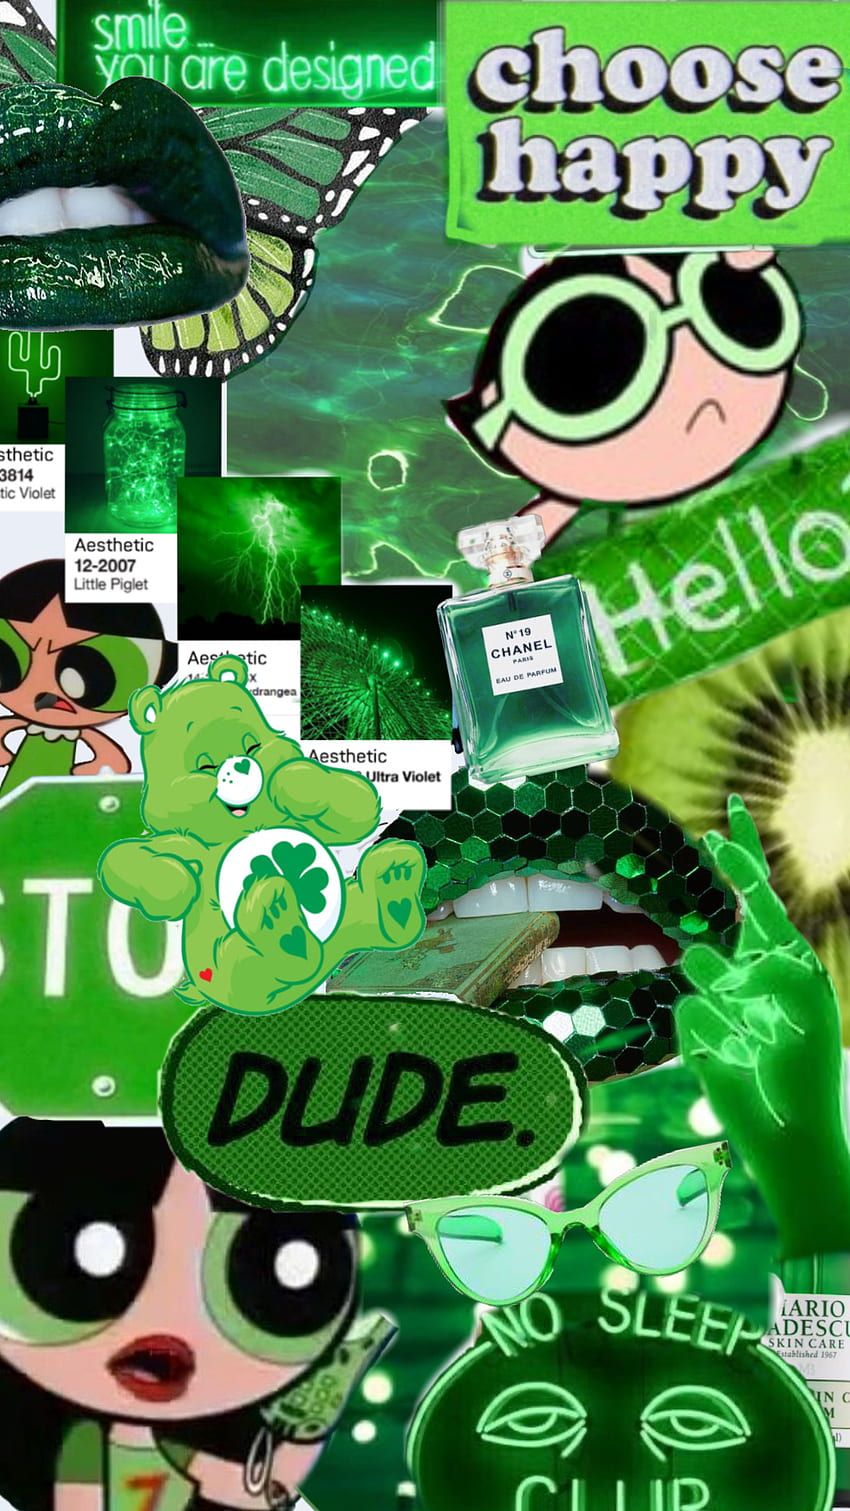 Aesthetic green background with kiwi, dude, and other random things - Buttercup